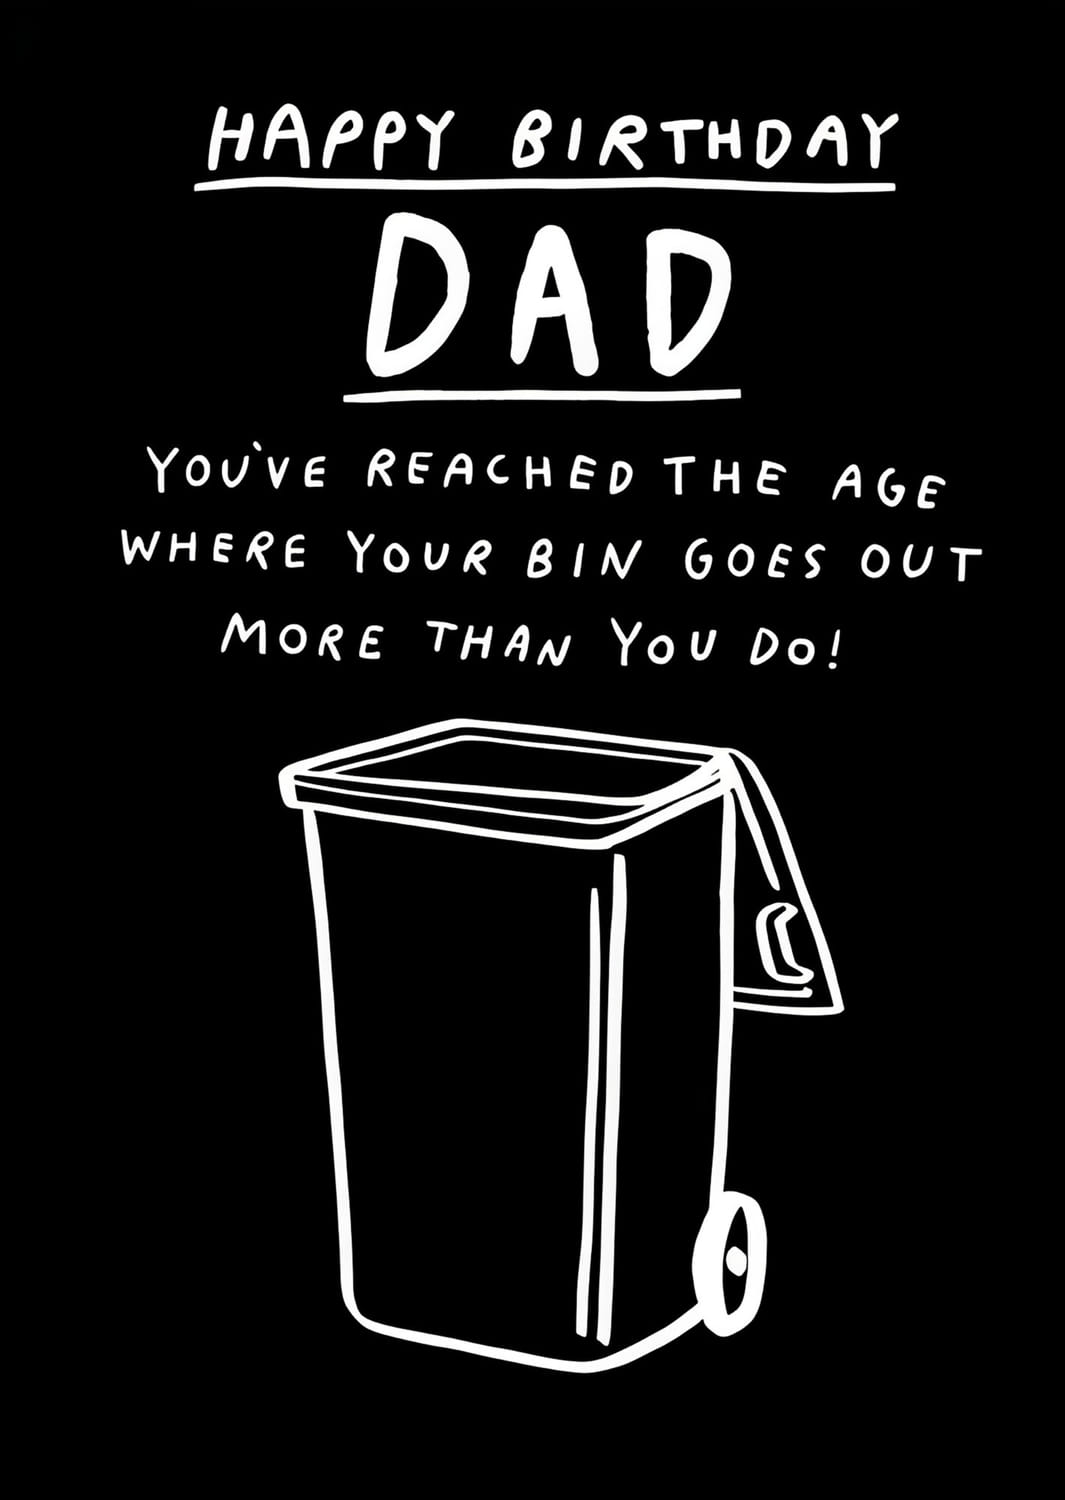 Dad Bin Goes Out Funny Birthday Card by penny black